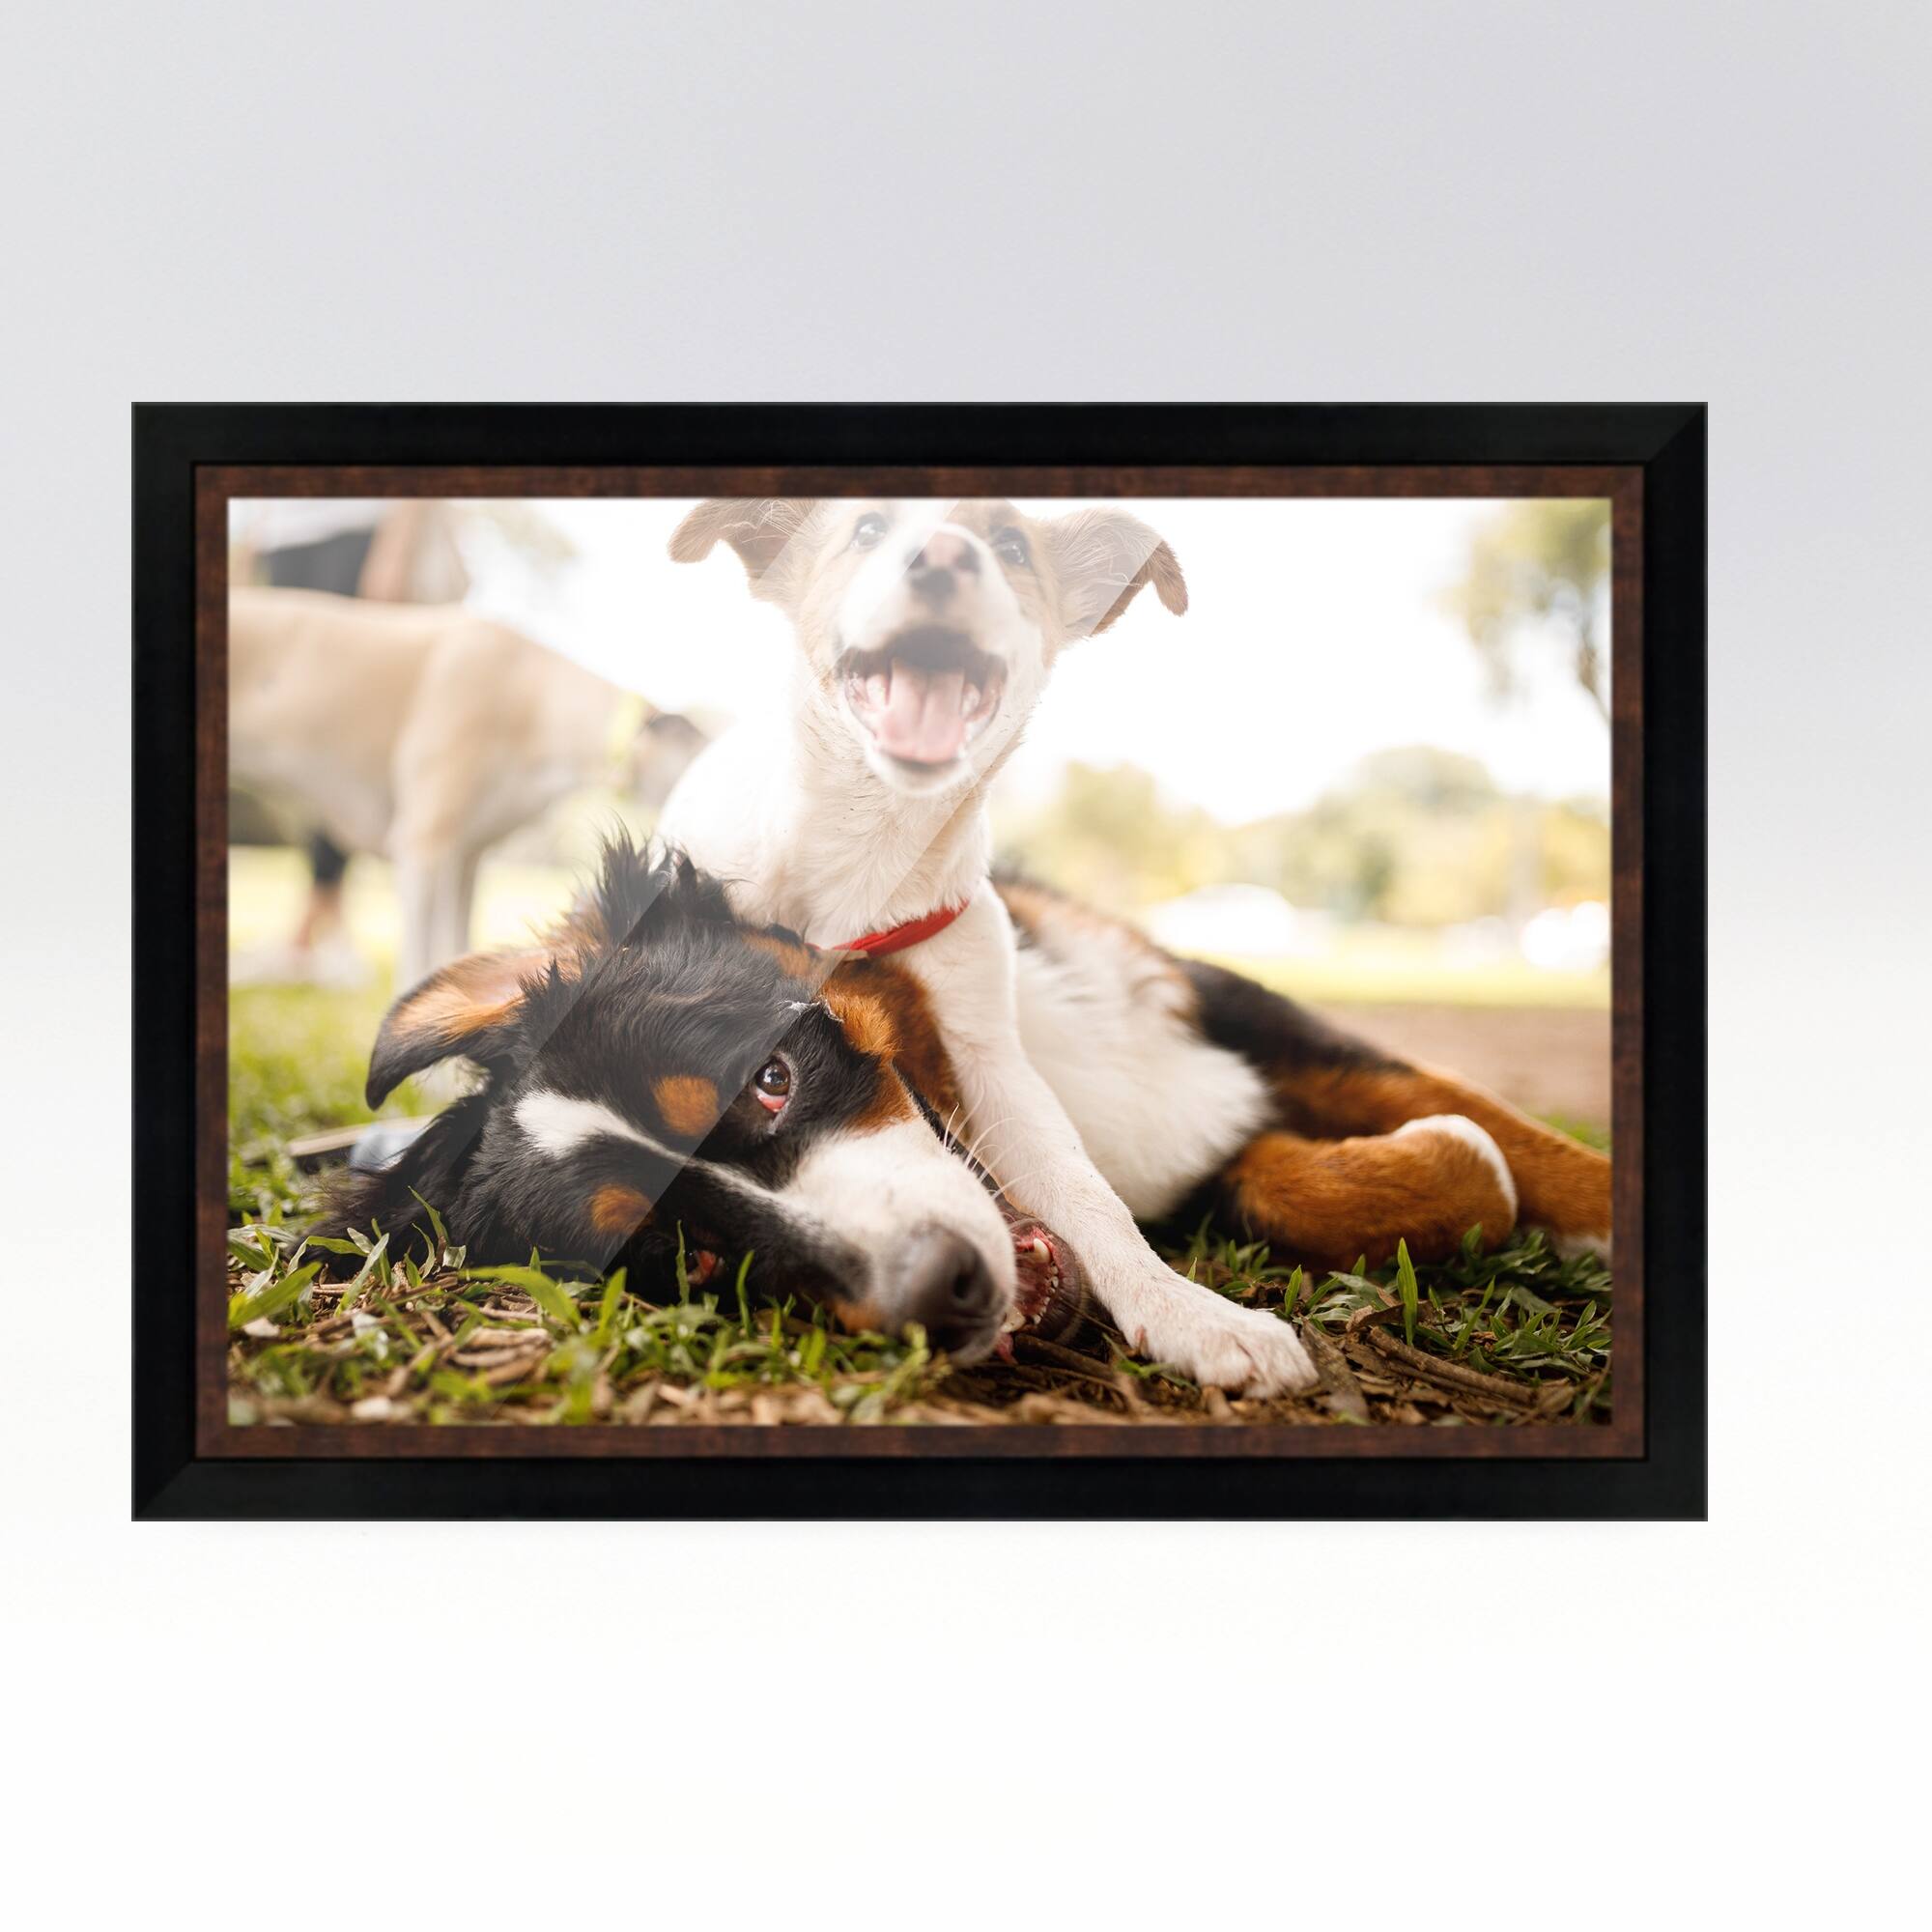 11x6 Black Picture Frame - Wood Picture Frame Complete with UV